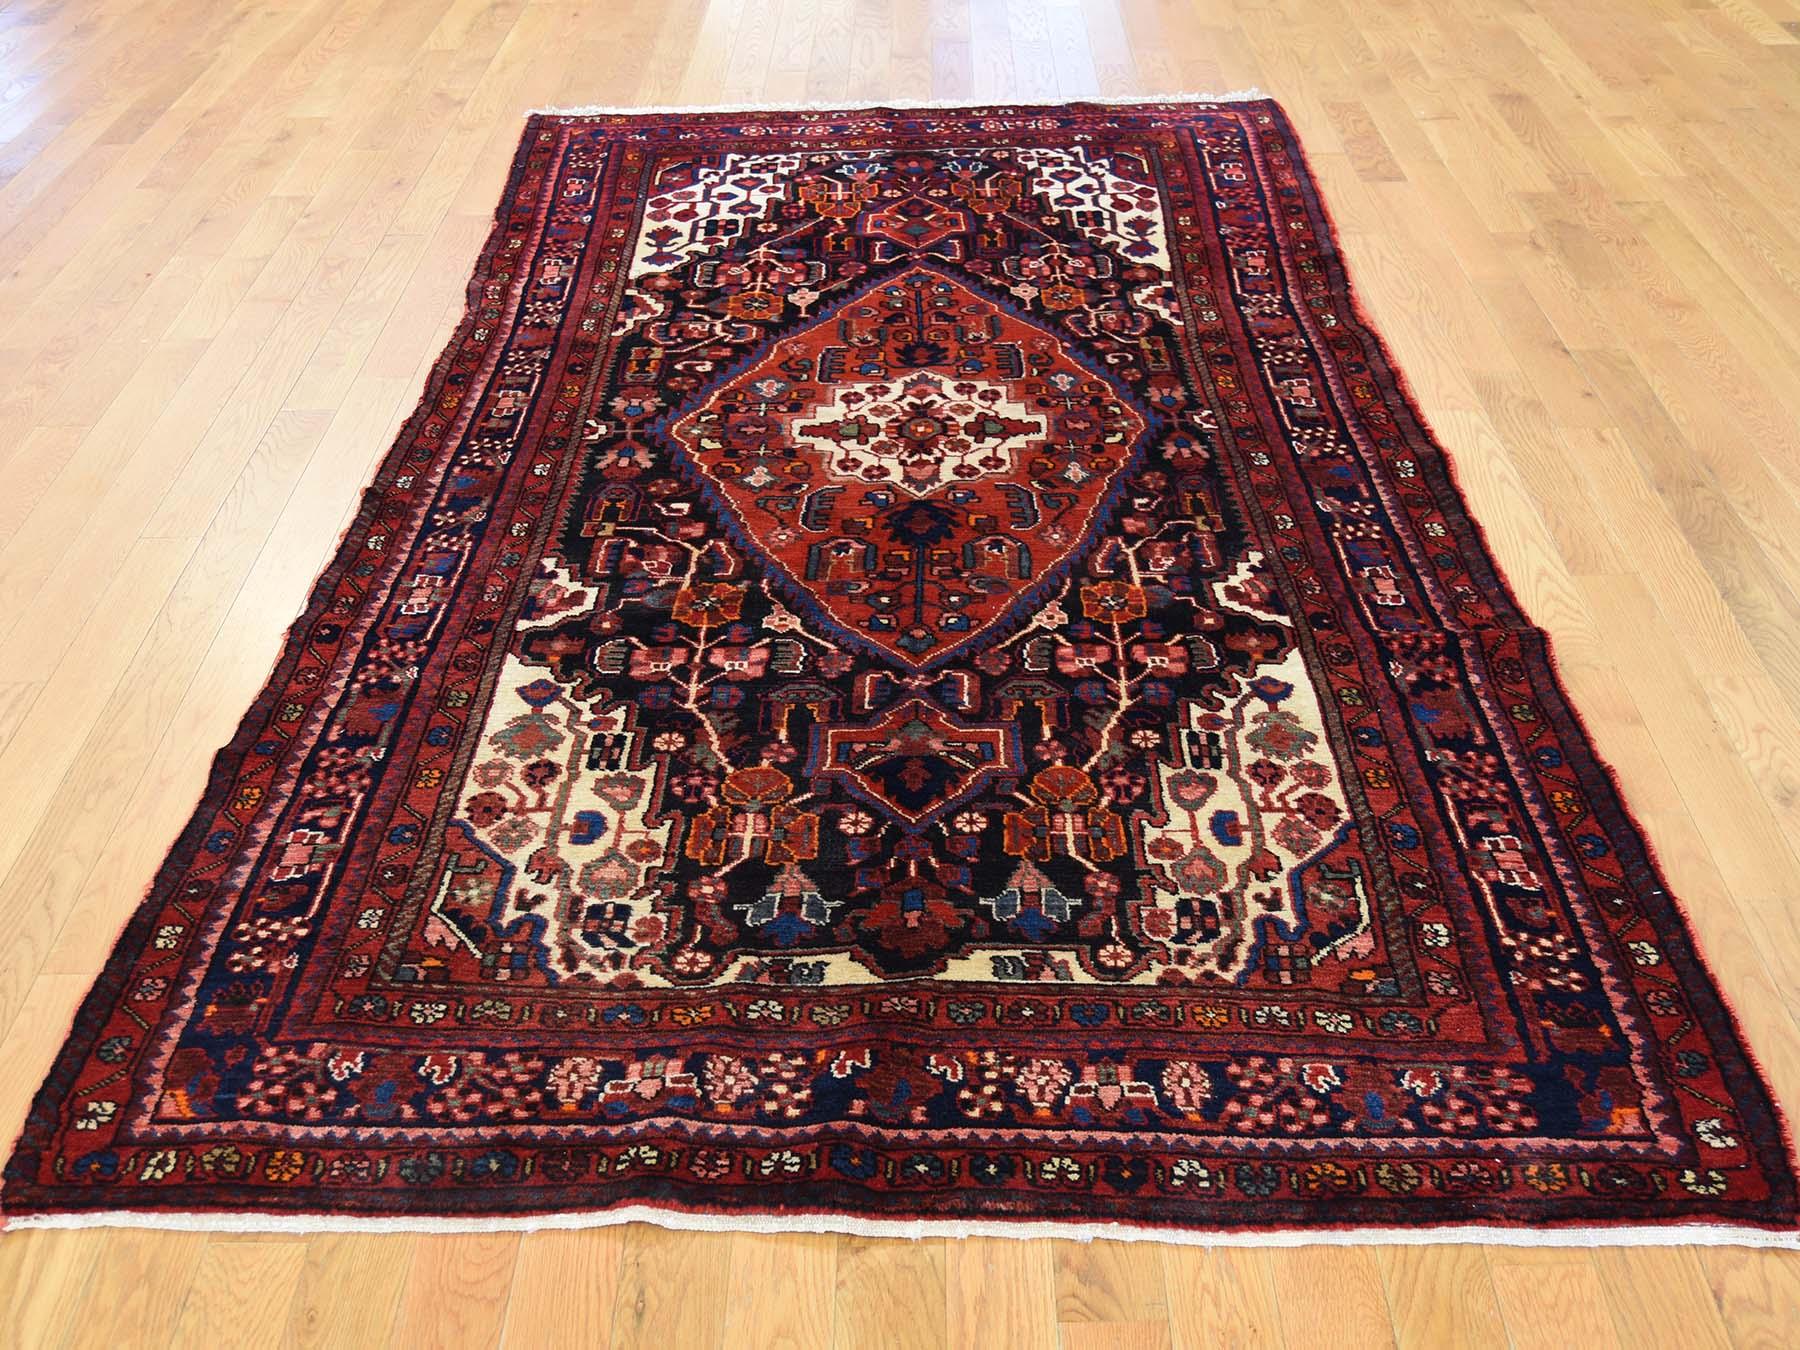 This is a truly genuine one-of-a-kind hand knotted semi antique Persian Nahavand wide runner rug. It has been knotted for months and months in the centuries-old Persian weaving craftsmanship techniques by expert artisans.

Primary materials: